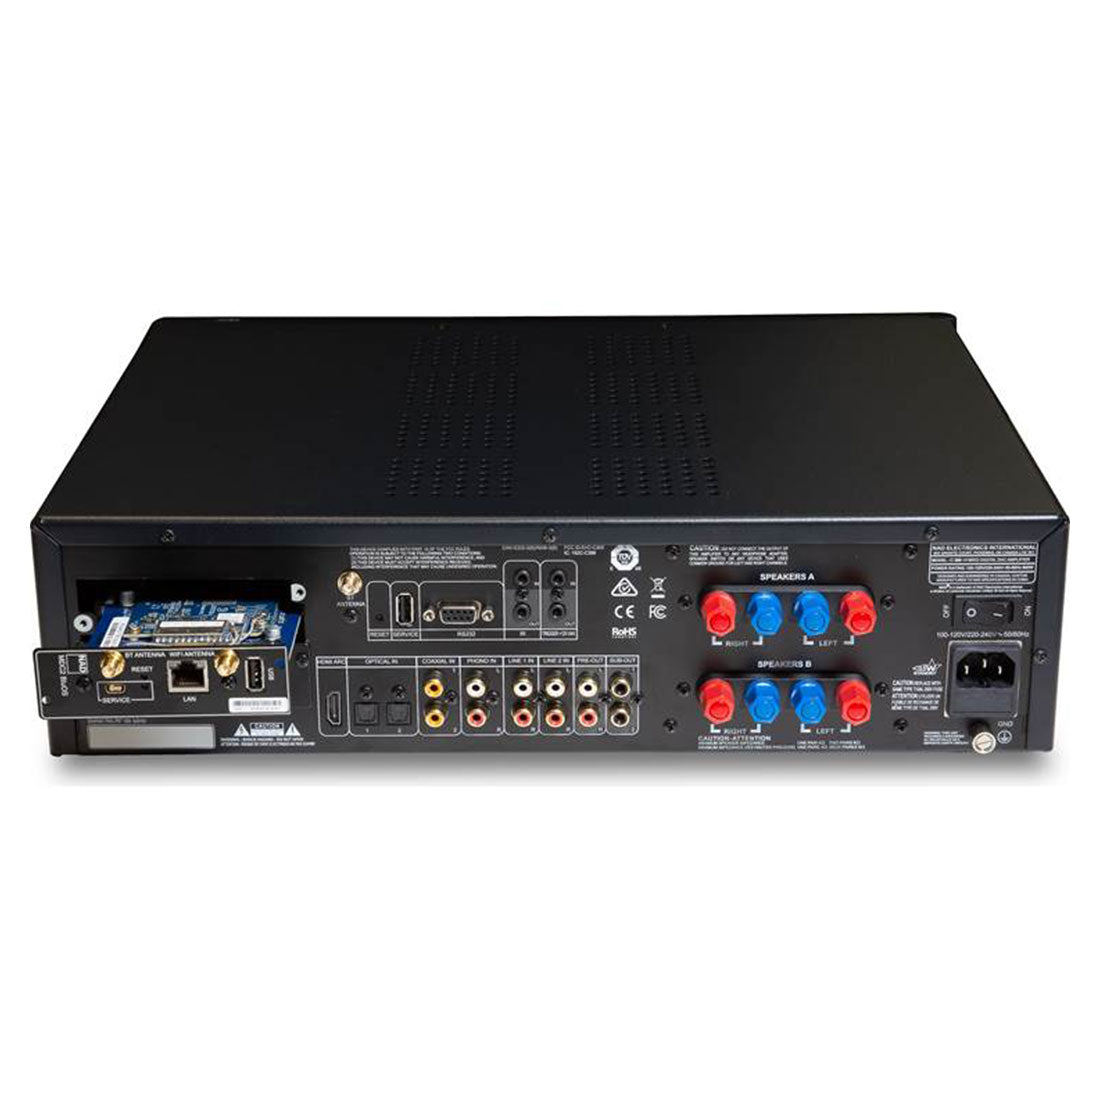 The C 399 HybridDigital DAC Amplifier takes NAD’s commitment to lasting value and sonic excellence to a whole new level. Best price on all NAD Electronics High Performance Hi-Fi and Home Theatre at Vinyl Sound, music and hi-fi apps including AV receivers, Music Streamers, Turntables, Amplifiers models C 399 - C 700 - M10 V2 - C 316BEE V2 - C 368 - D 3045.